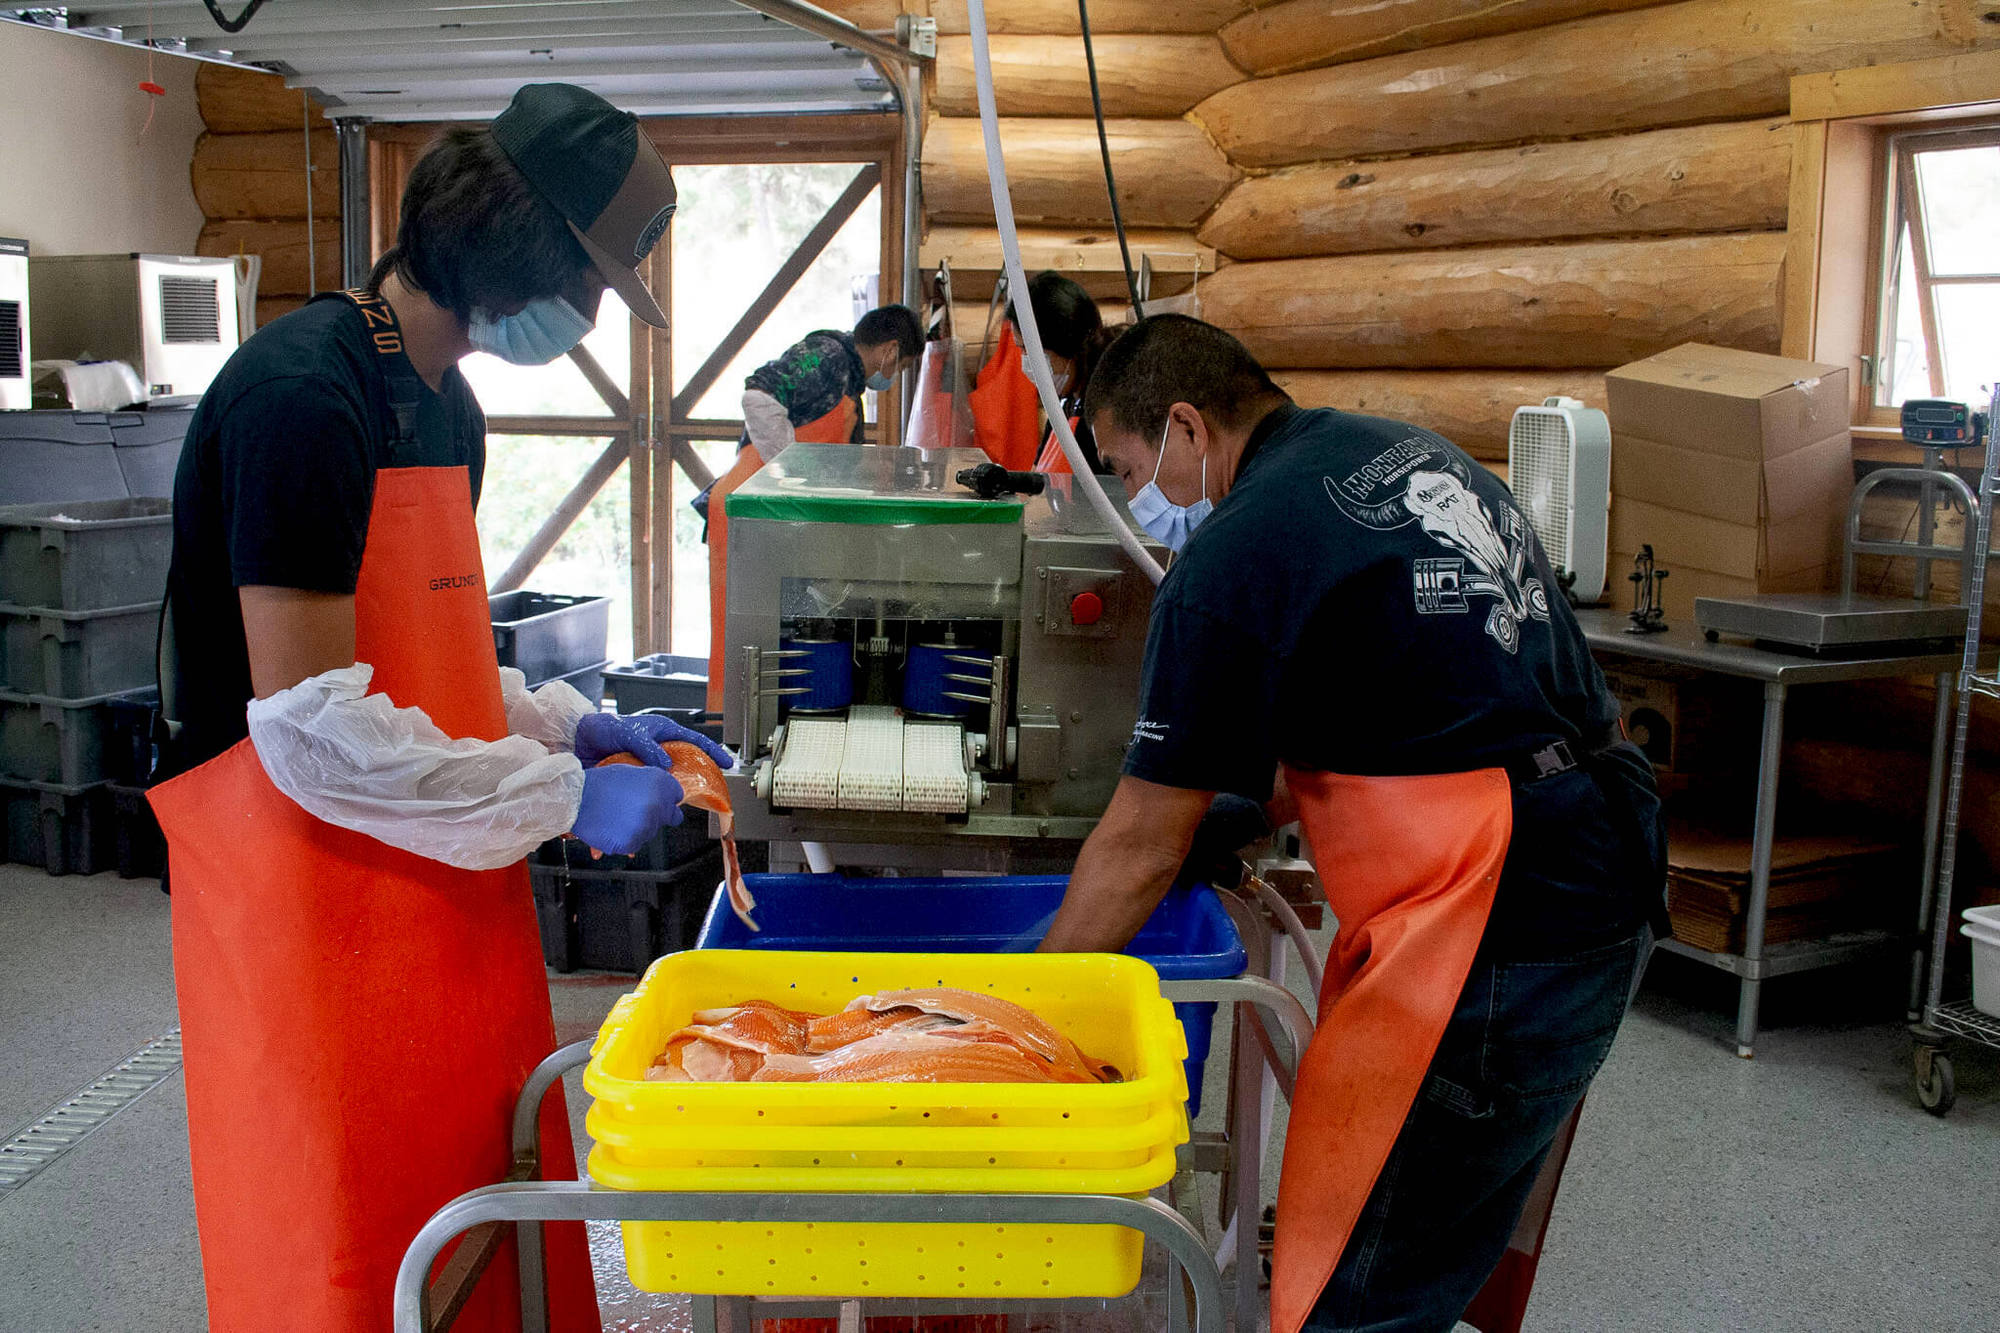 Members of CSKT’s cleaning lake trout and processing at the Blue Bay fish processing center on the southeastern shore of Flathead Lake. November 2021